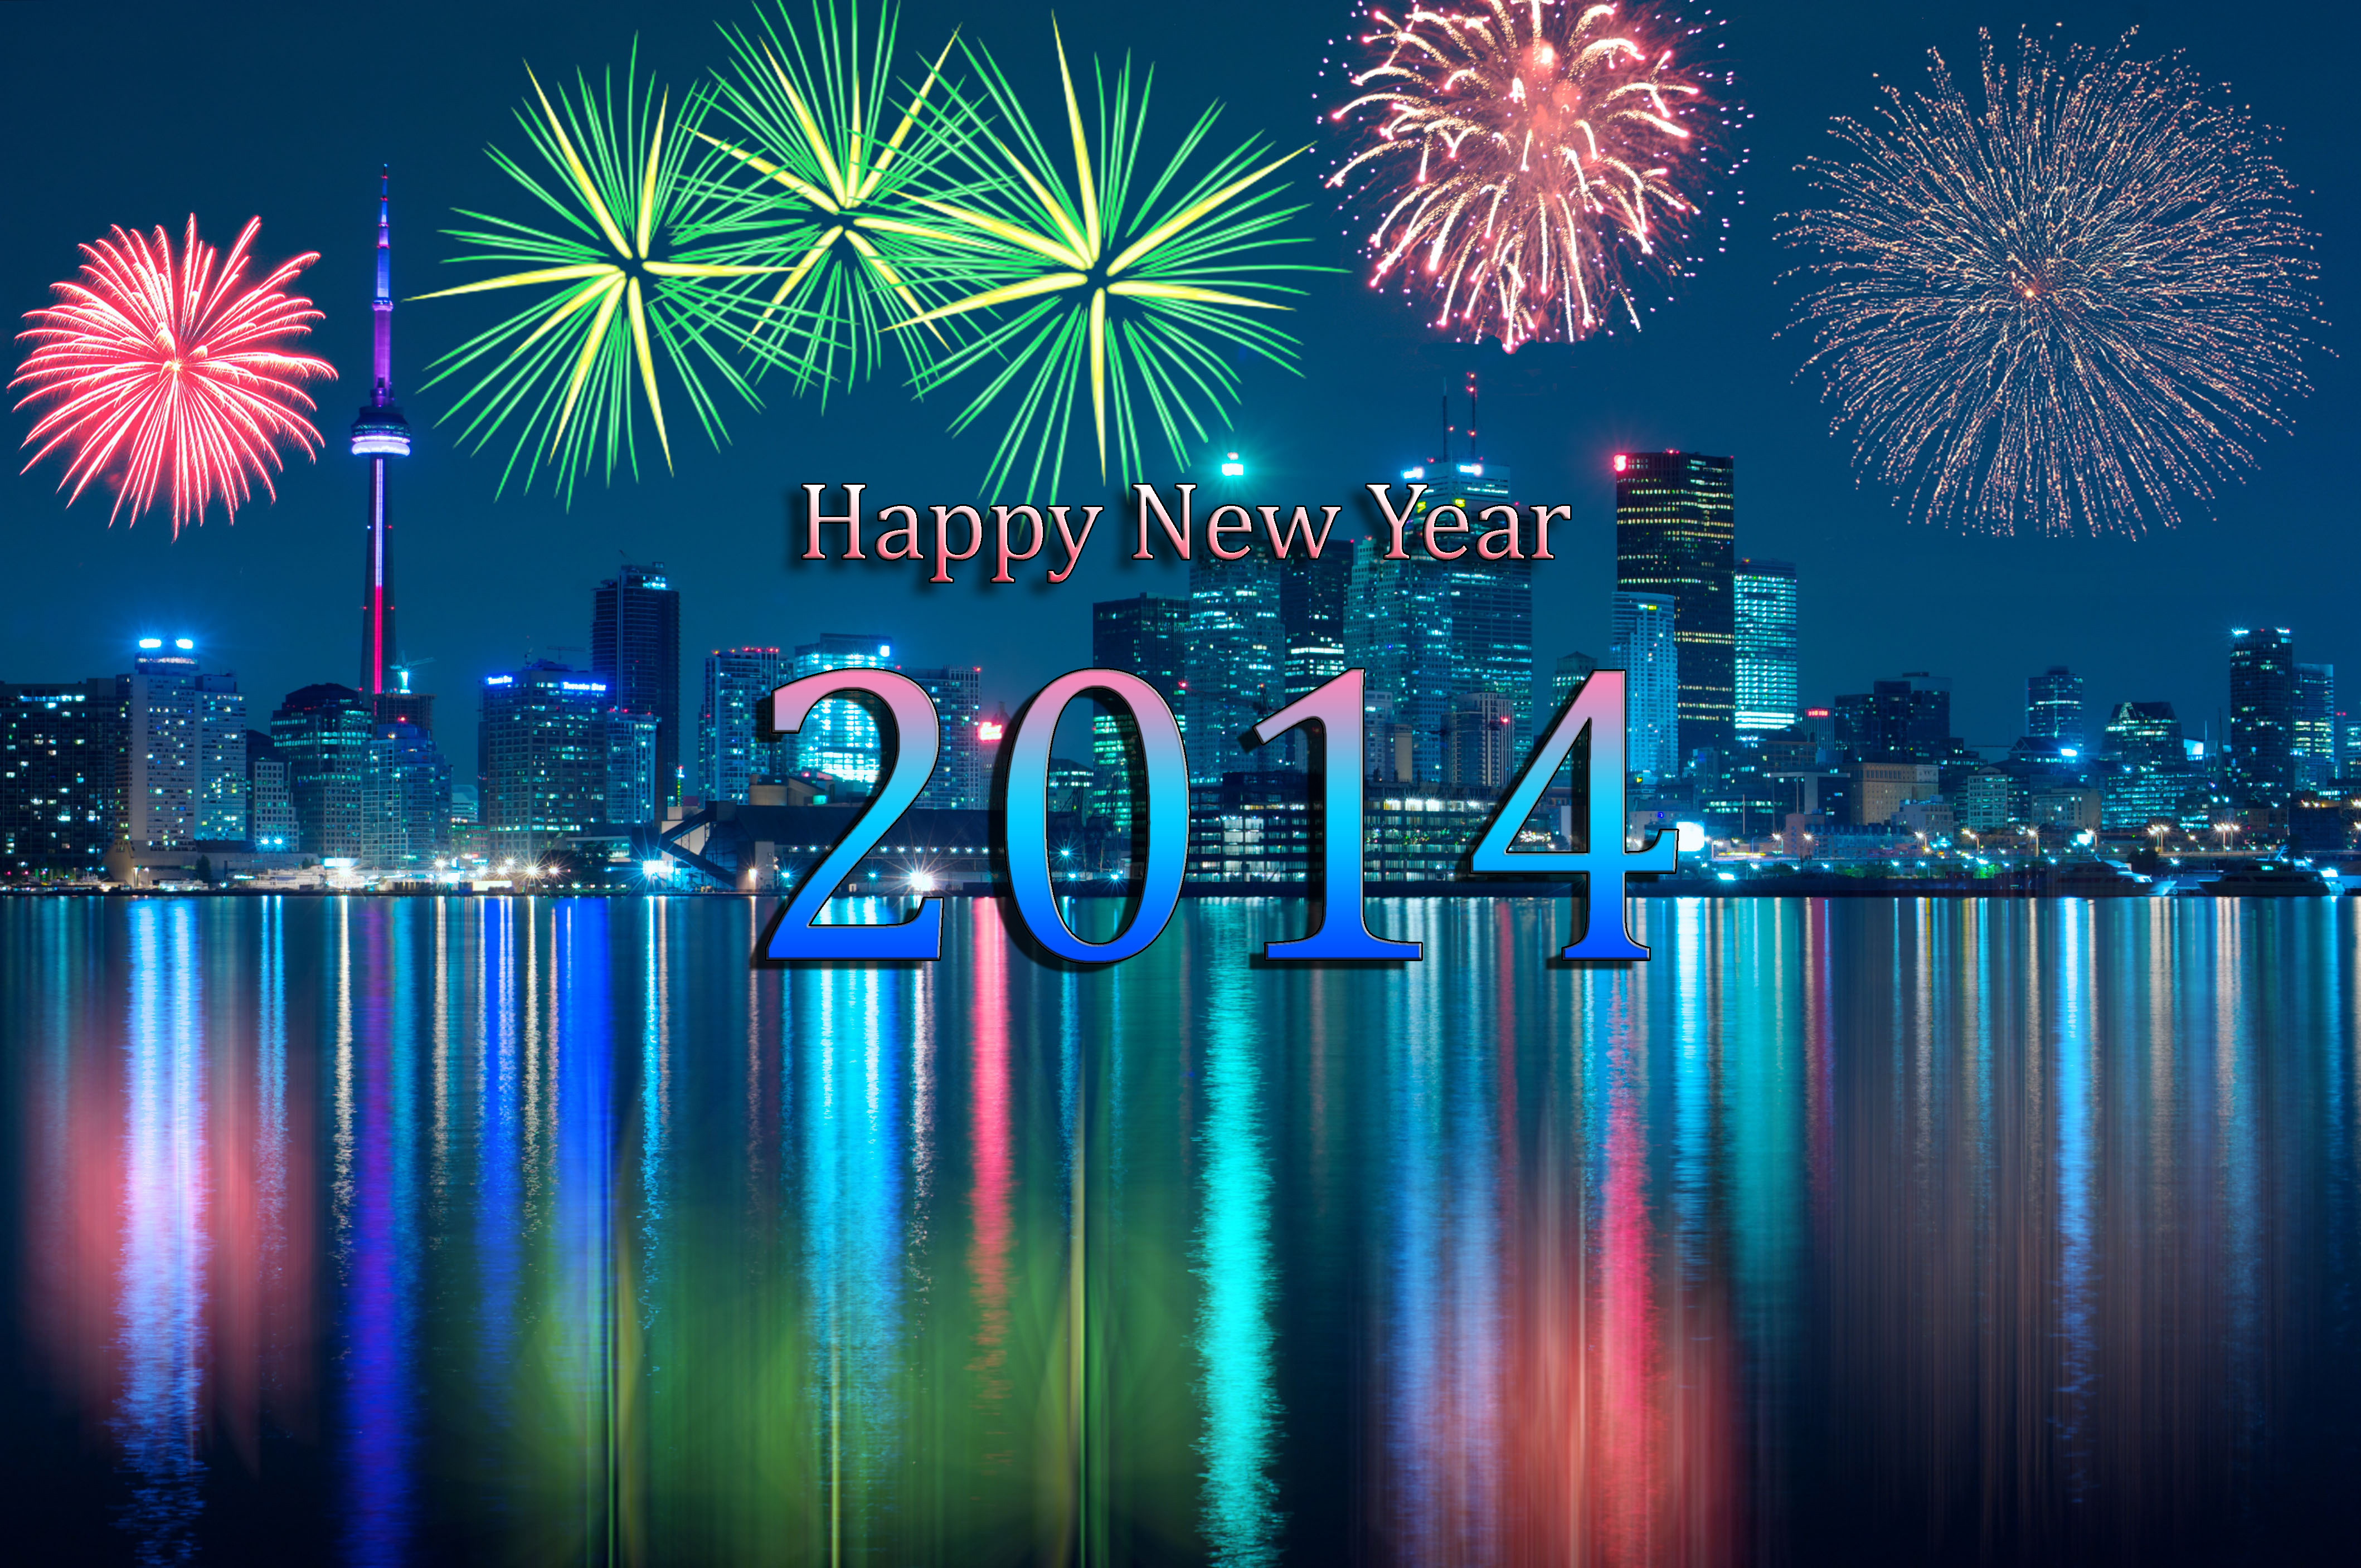 New Year 2014 on a background of fireworks wallpapers and images